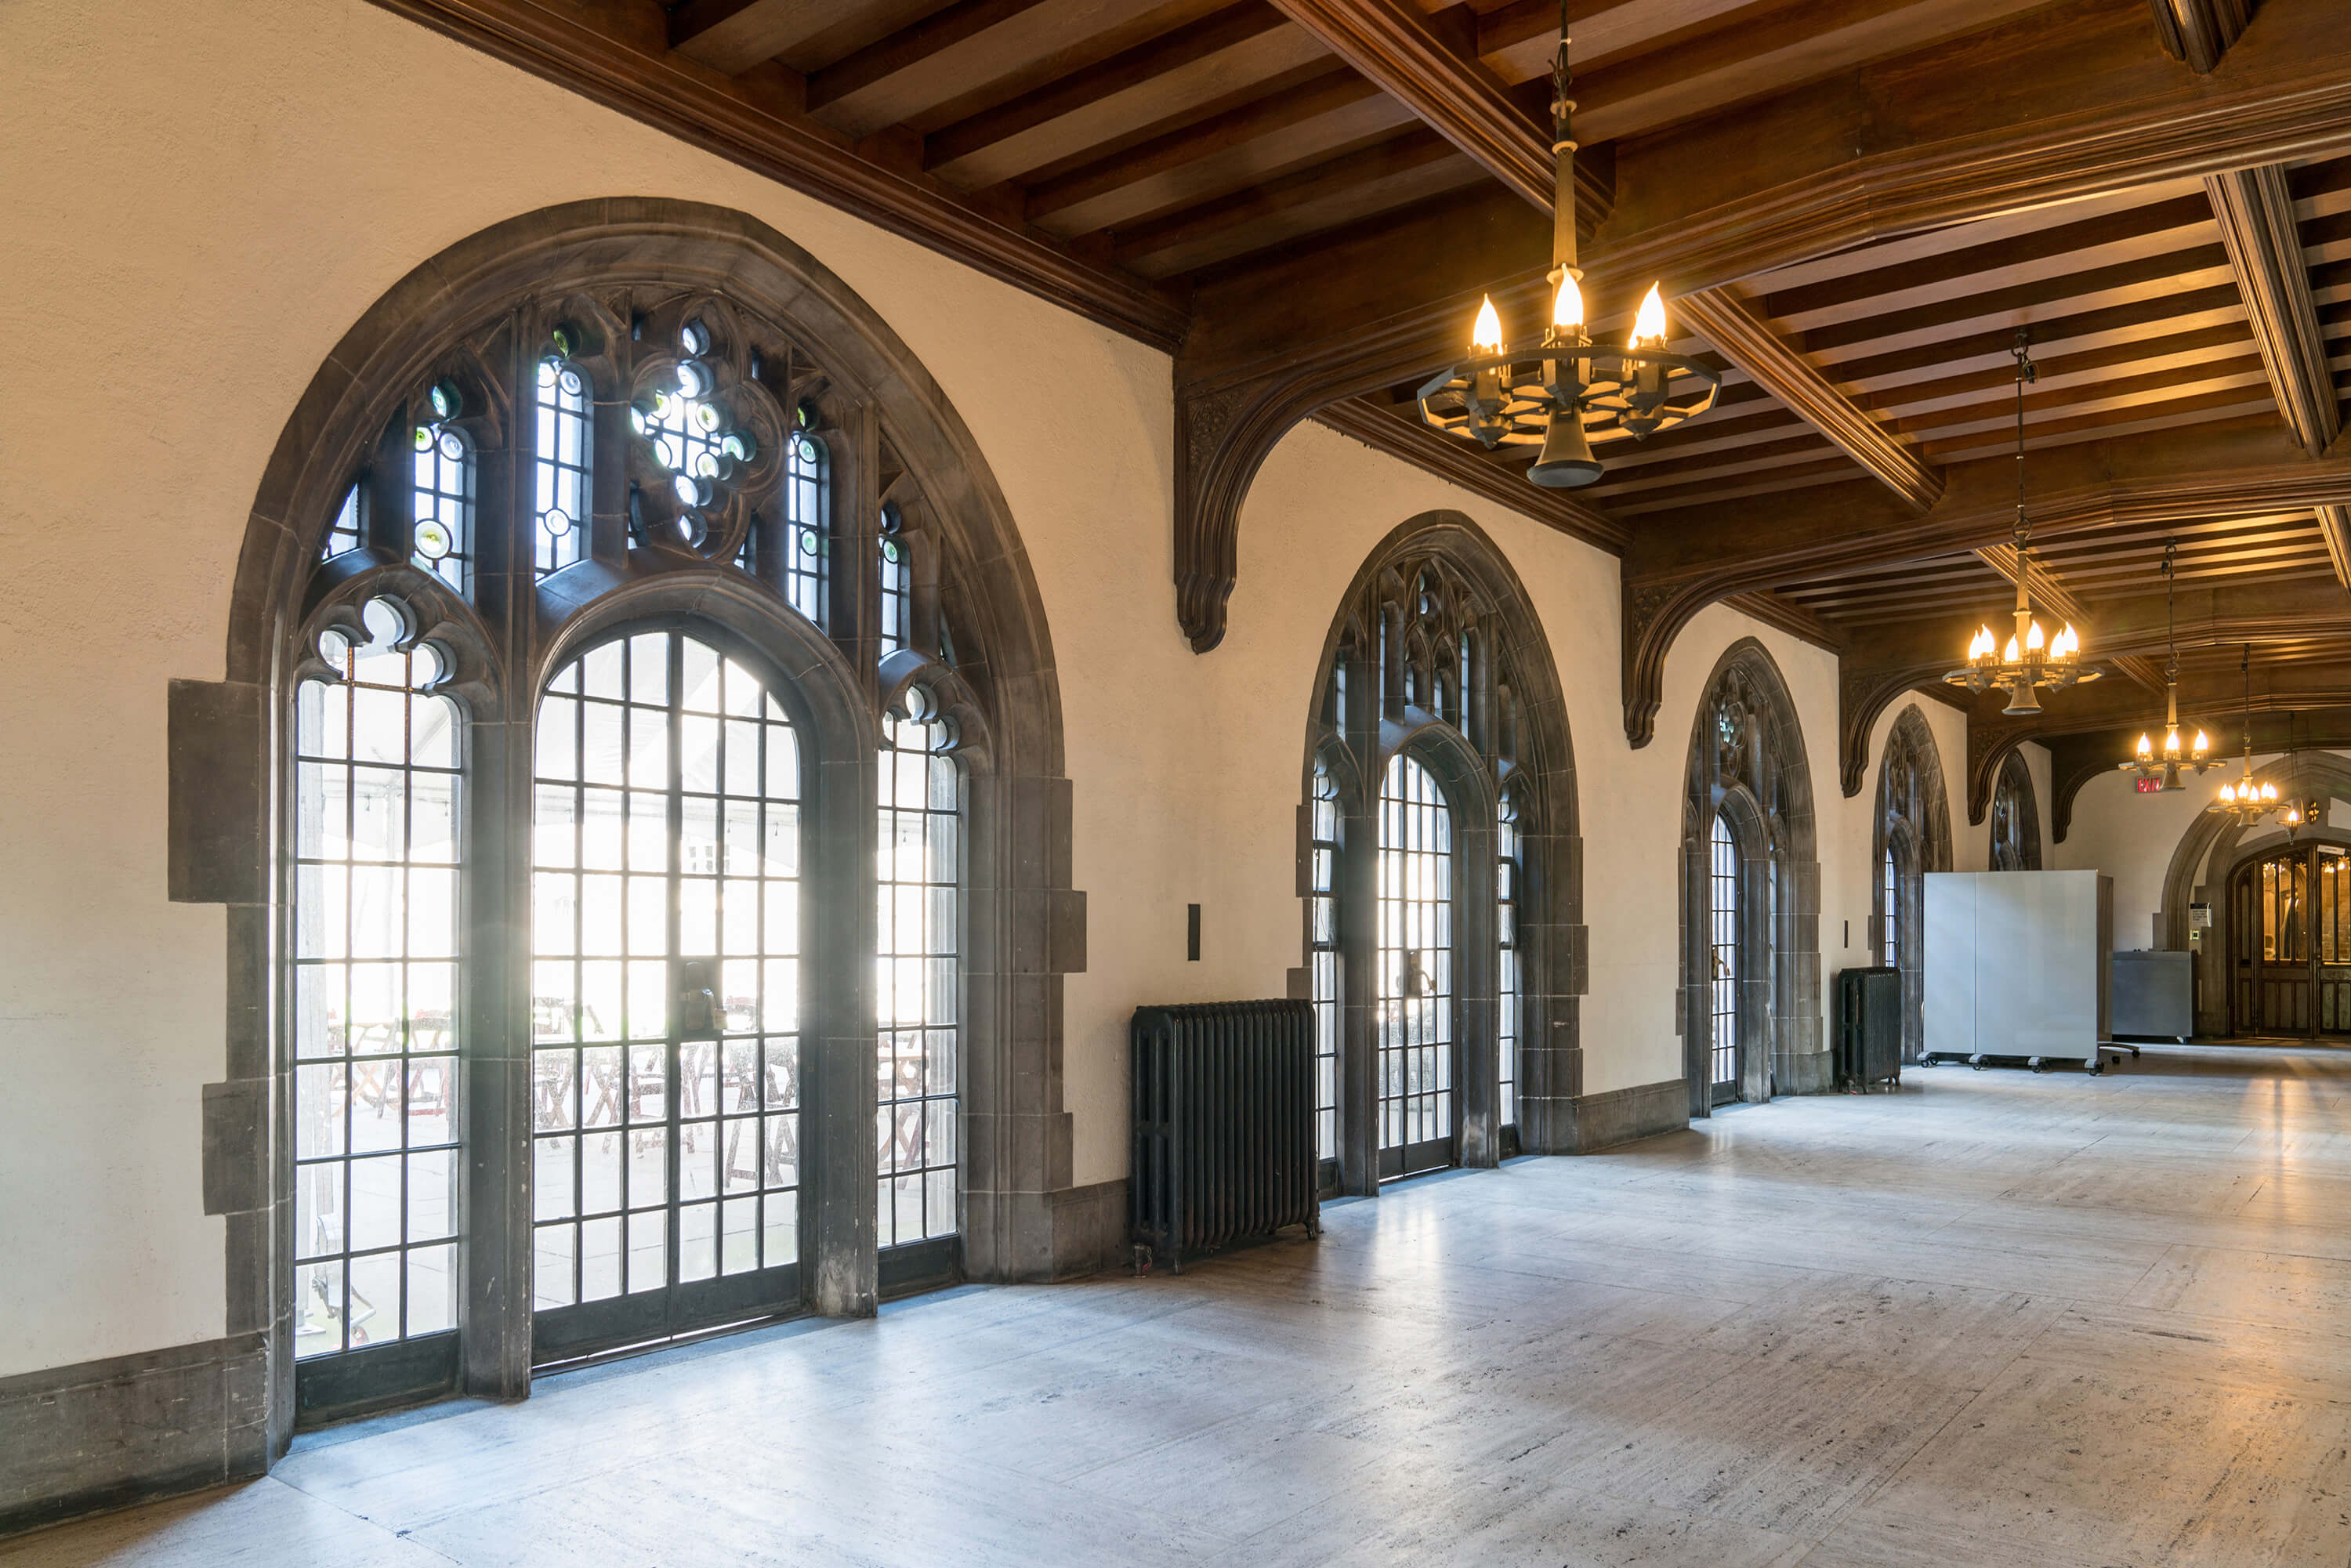 A broad hallway with arched windows and doors